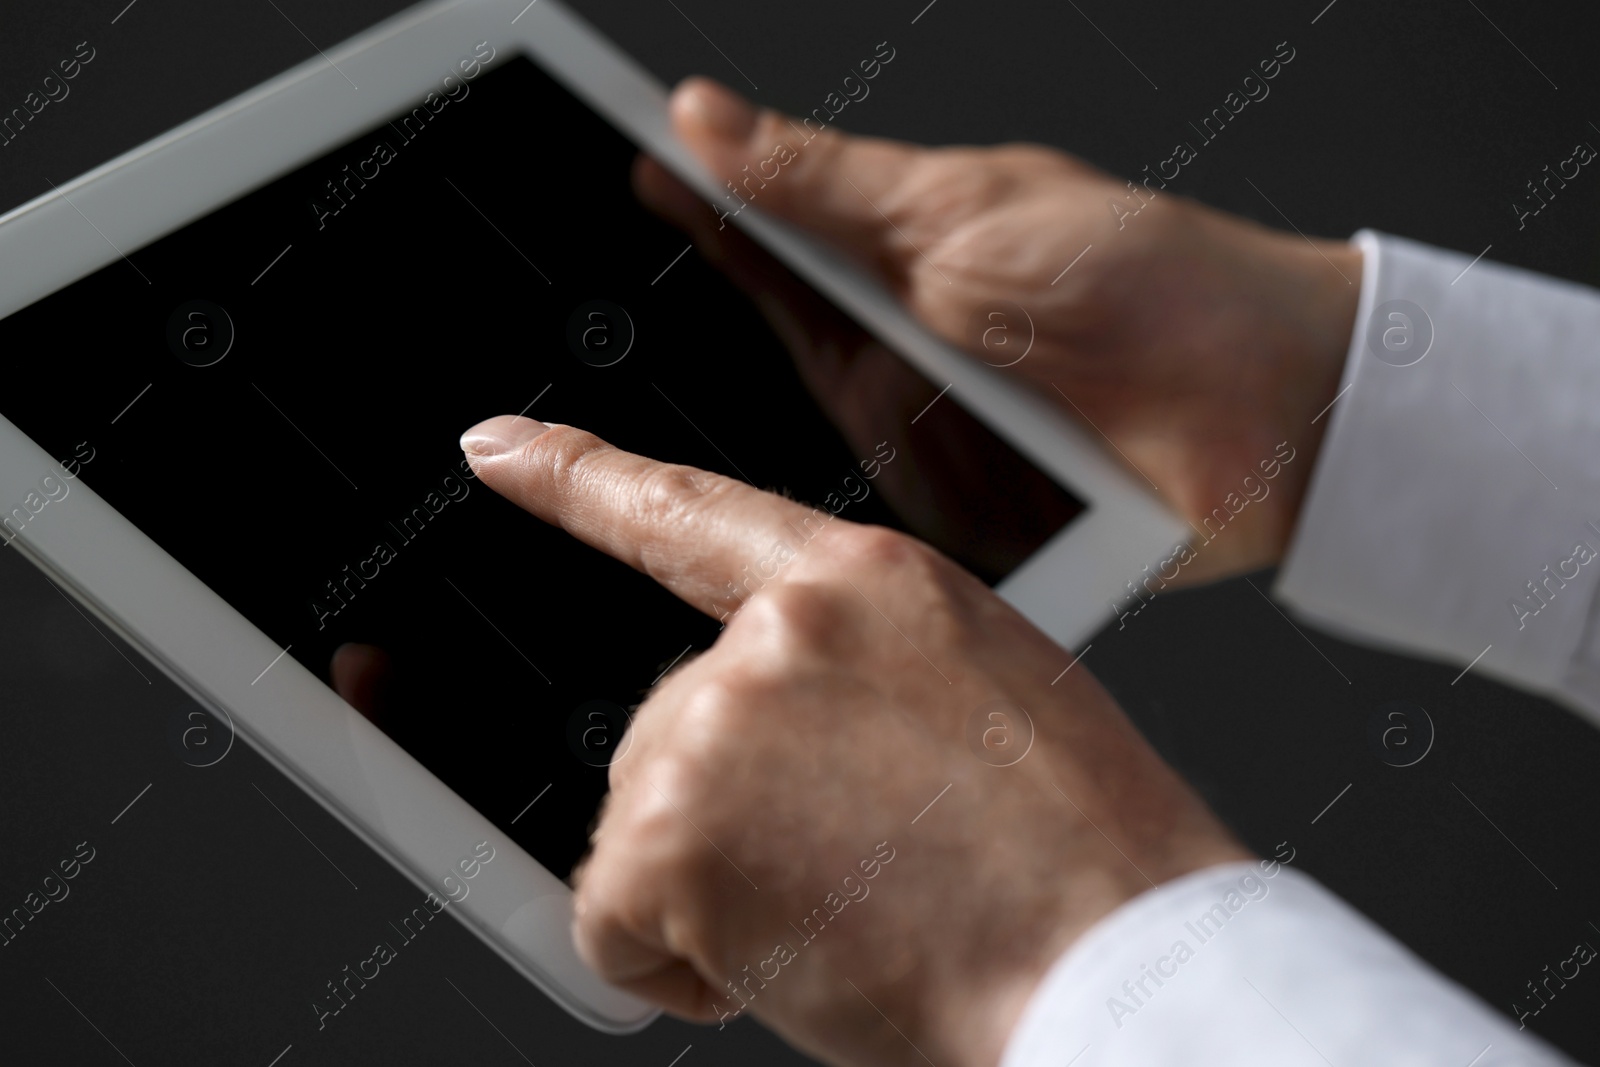 Photo of Closeup view of man using new tablet on black background